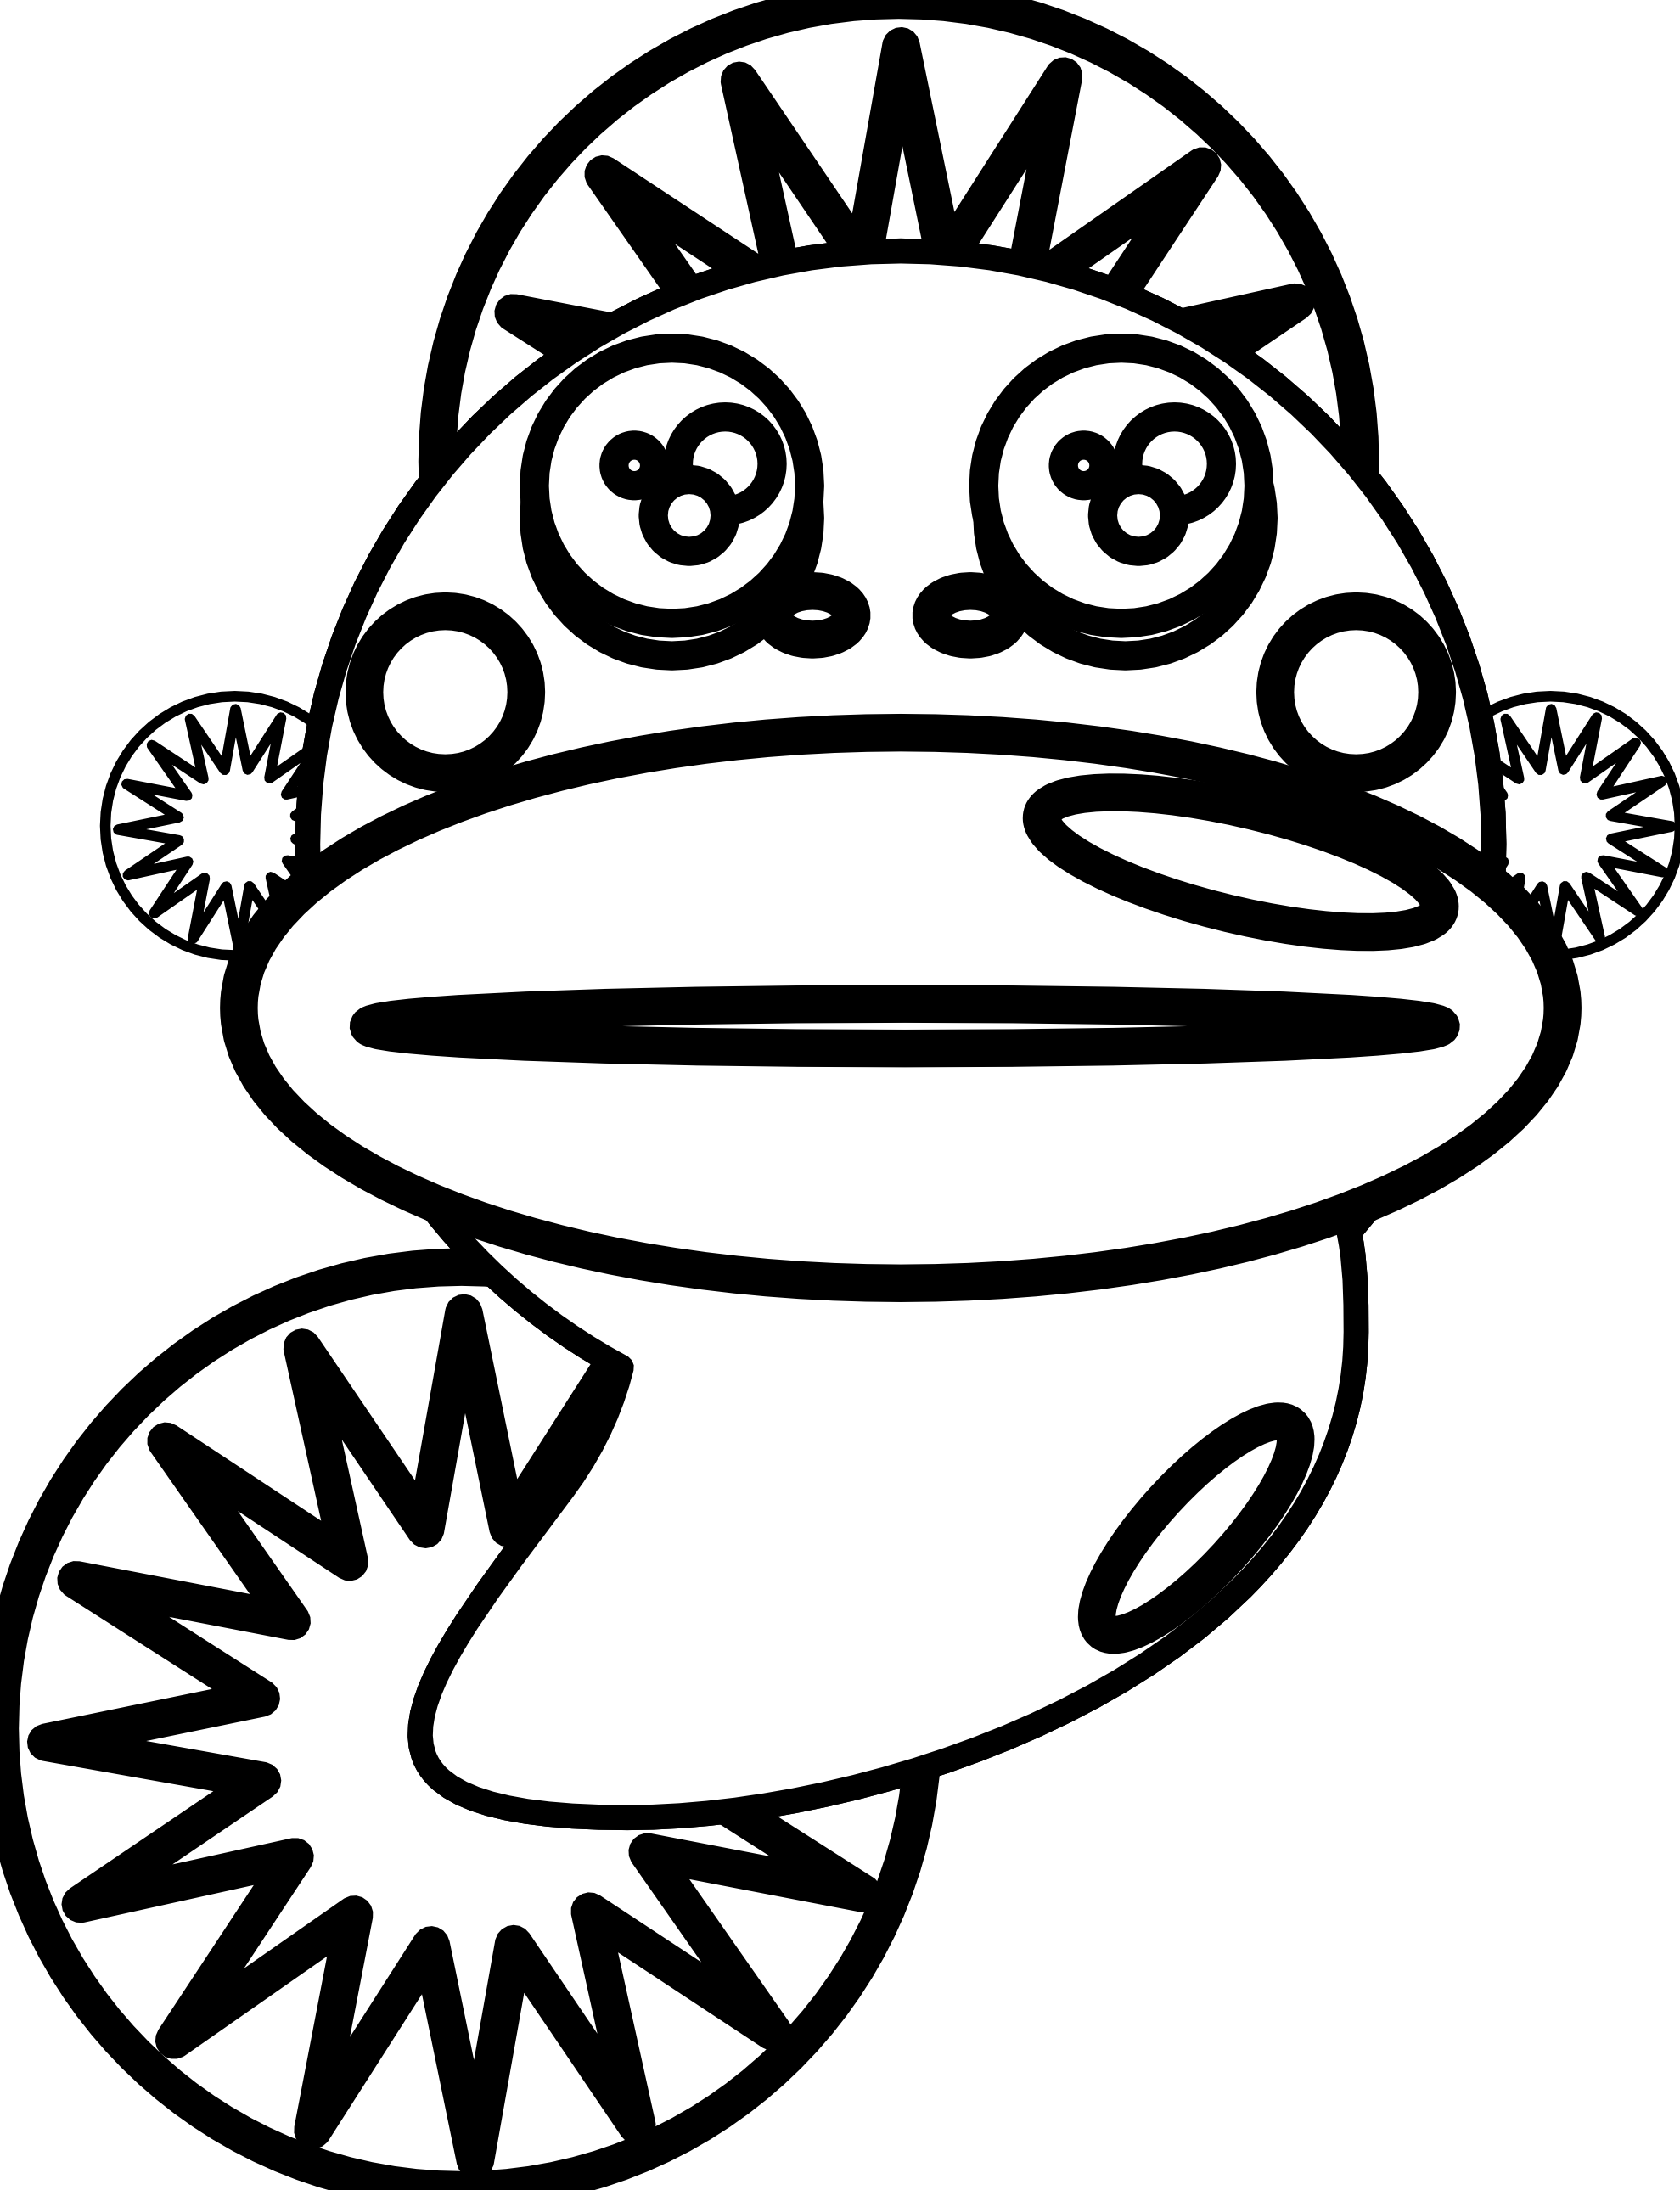 Cring Ugly Fish Black White Line Animal 555px - Coloring Book (1979x2580)